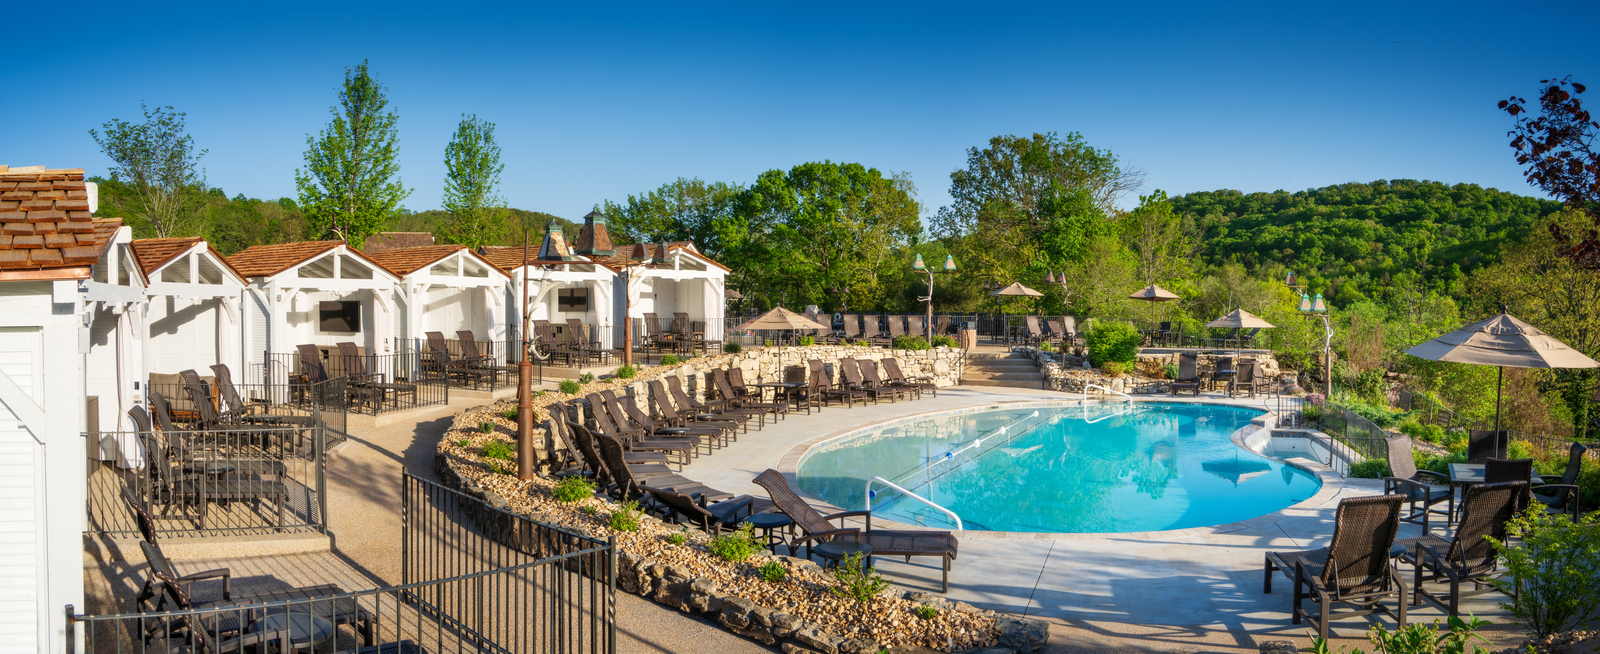 Cabanas at the Adults-Only Pool at Big Cedar Lodge